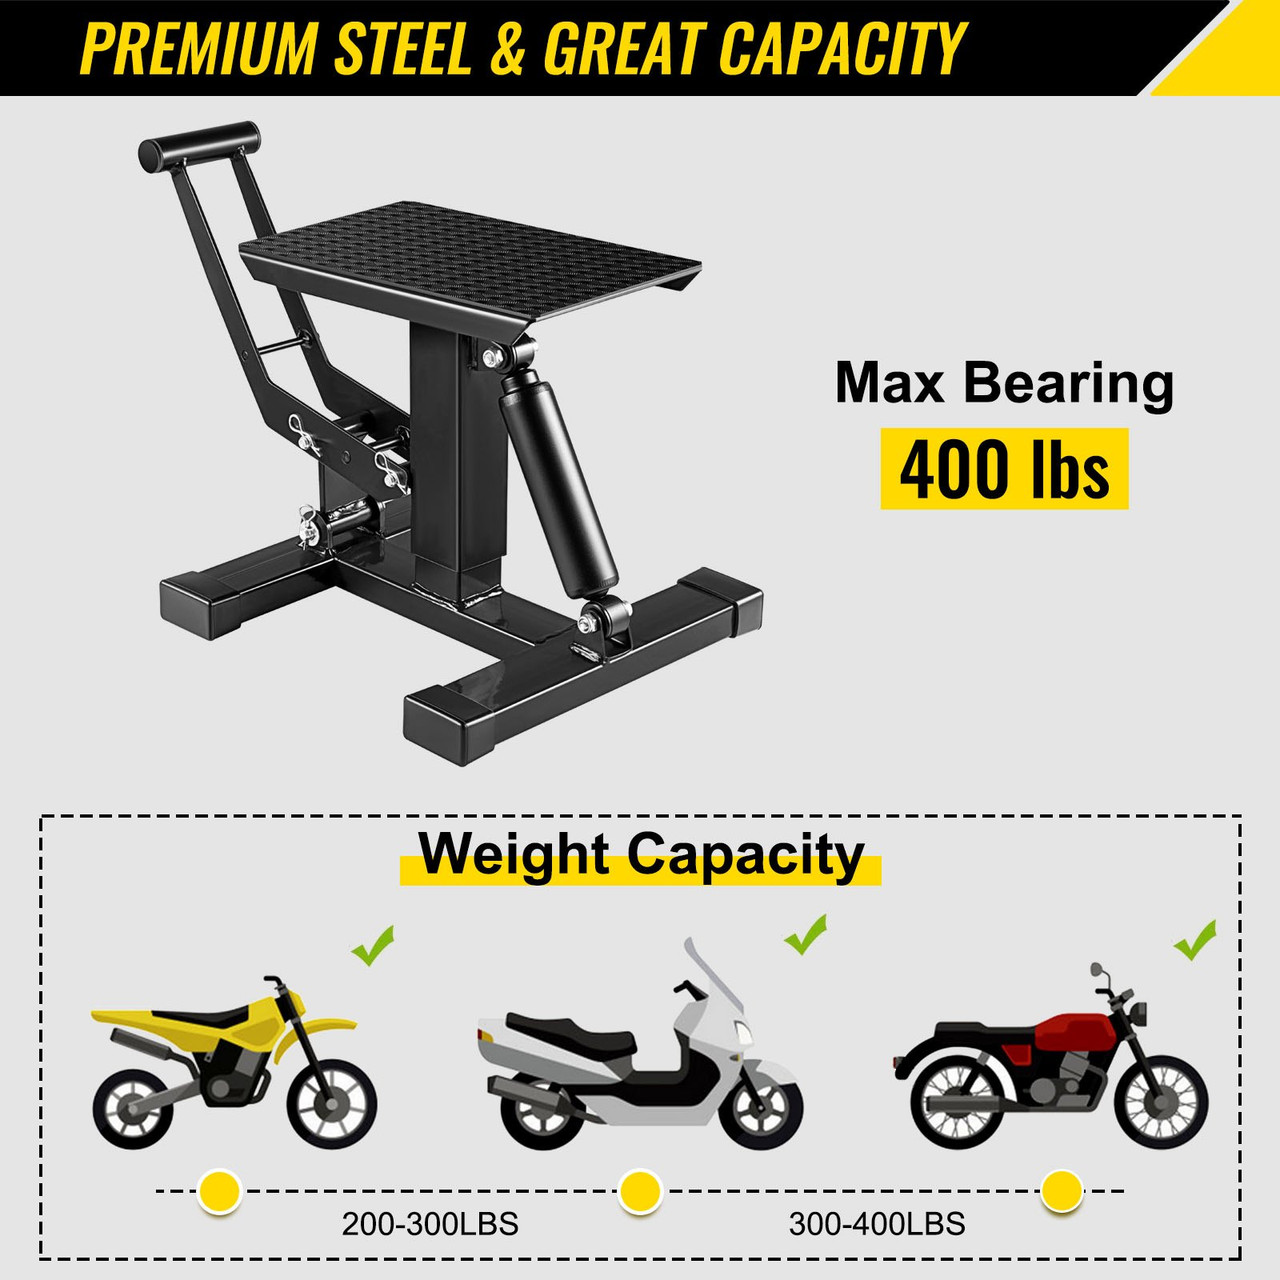 Motorcycle Dirt Bike Lift Stand, 400 Lbs Heavy Duty Motorcycle Lift Repair Stand, 9.0"-16.5" Adjustable Steel Lift Stand Dirt Bike Maintenance Table Rack, Black Jack Hoist Height Lifting Stand